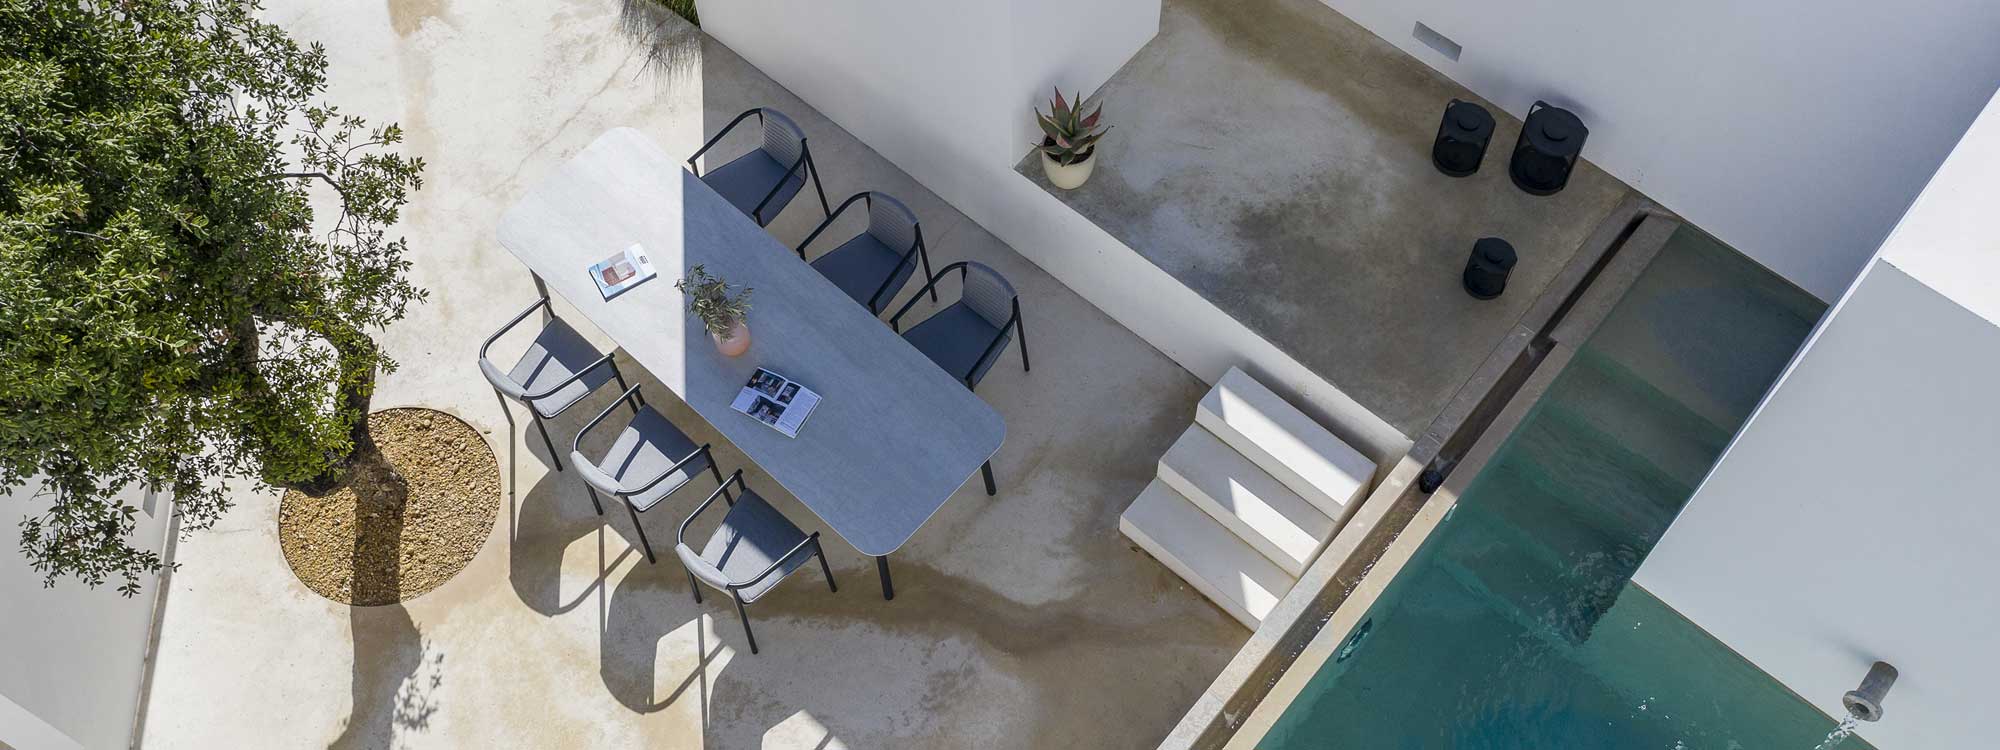 Birdseye view of Duct Round chair and Starling modern garden table on contemporary terrace